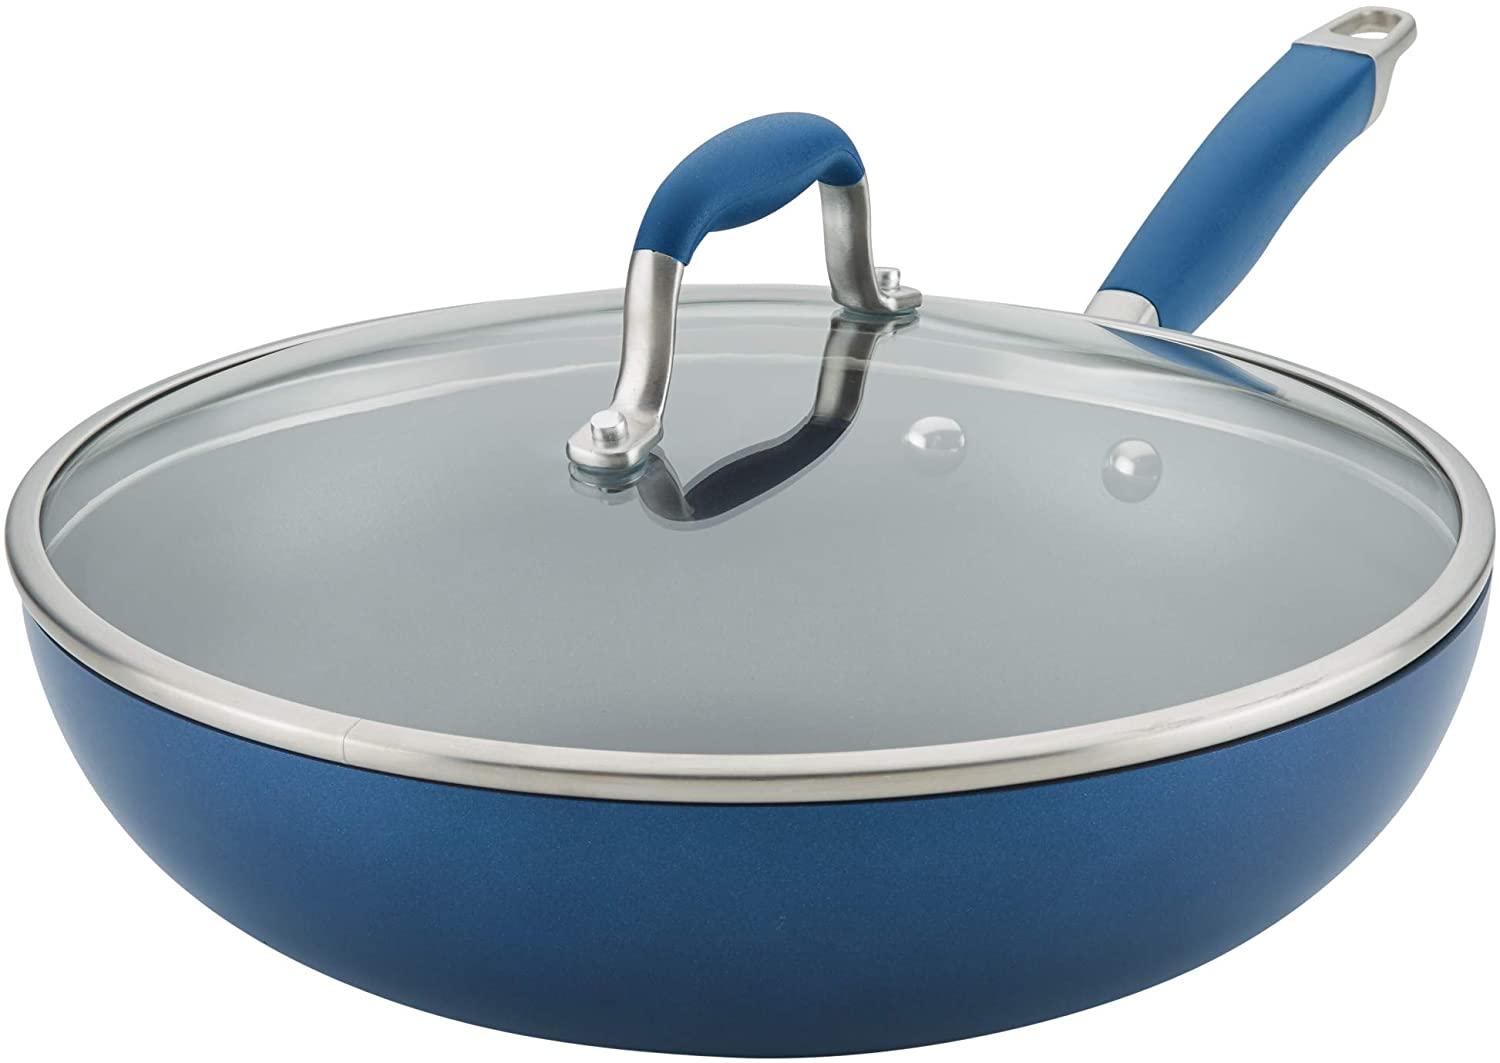 Anolon Advanced Home Hard Anodized Nonstick All Purpose Pan for $39.99 Shipped